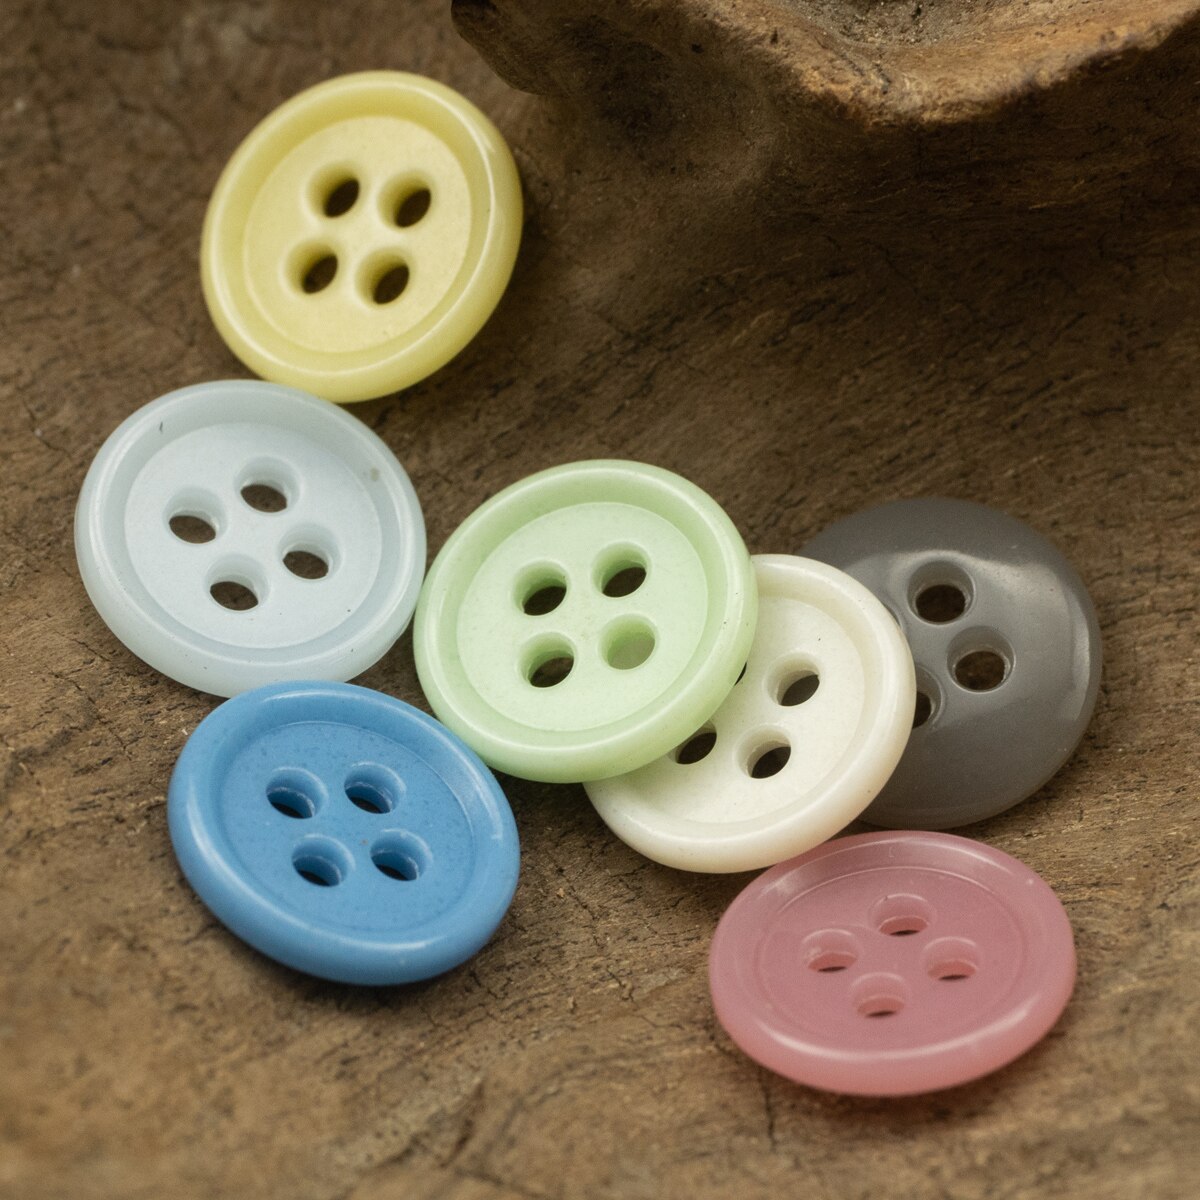 12pcs DIY Children Clothing Buttons Urea Odorless Sewing Accessories S